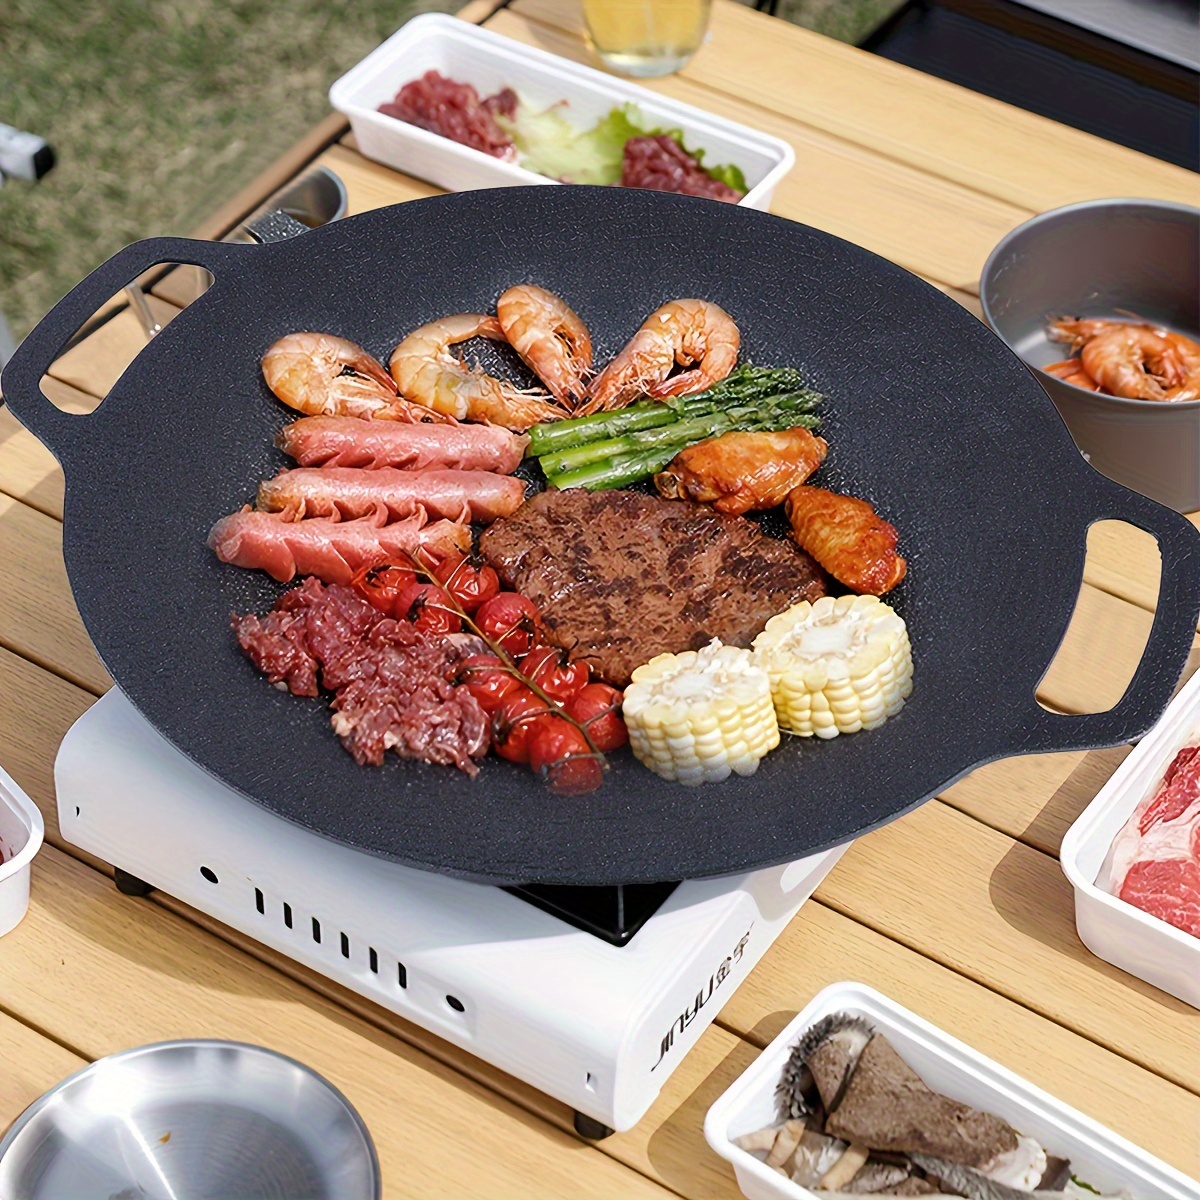 70 cm Full flat cast iron commercial Electric grill griddle